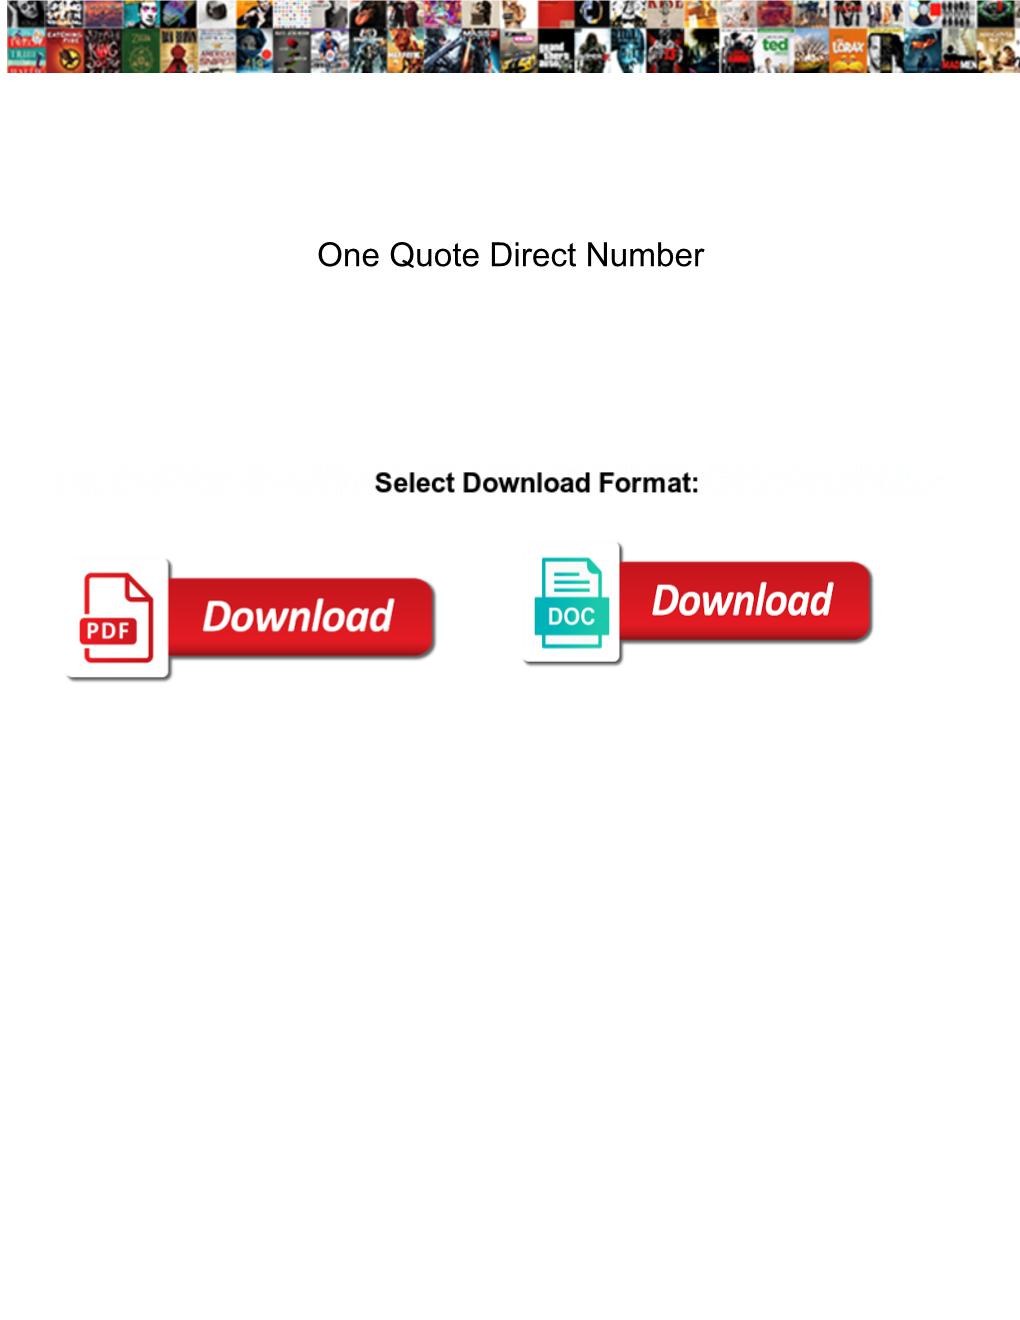 One Quote Direct Number